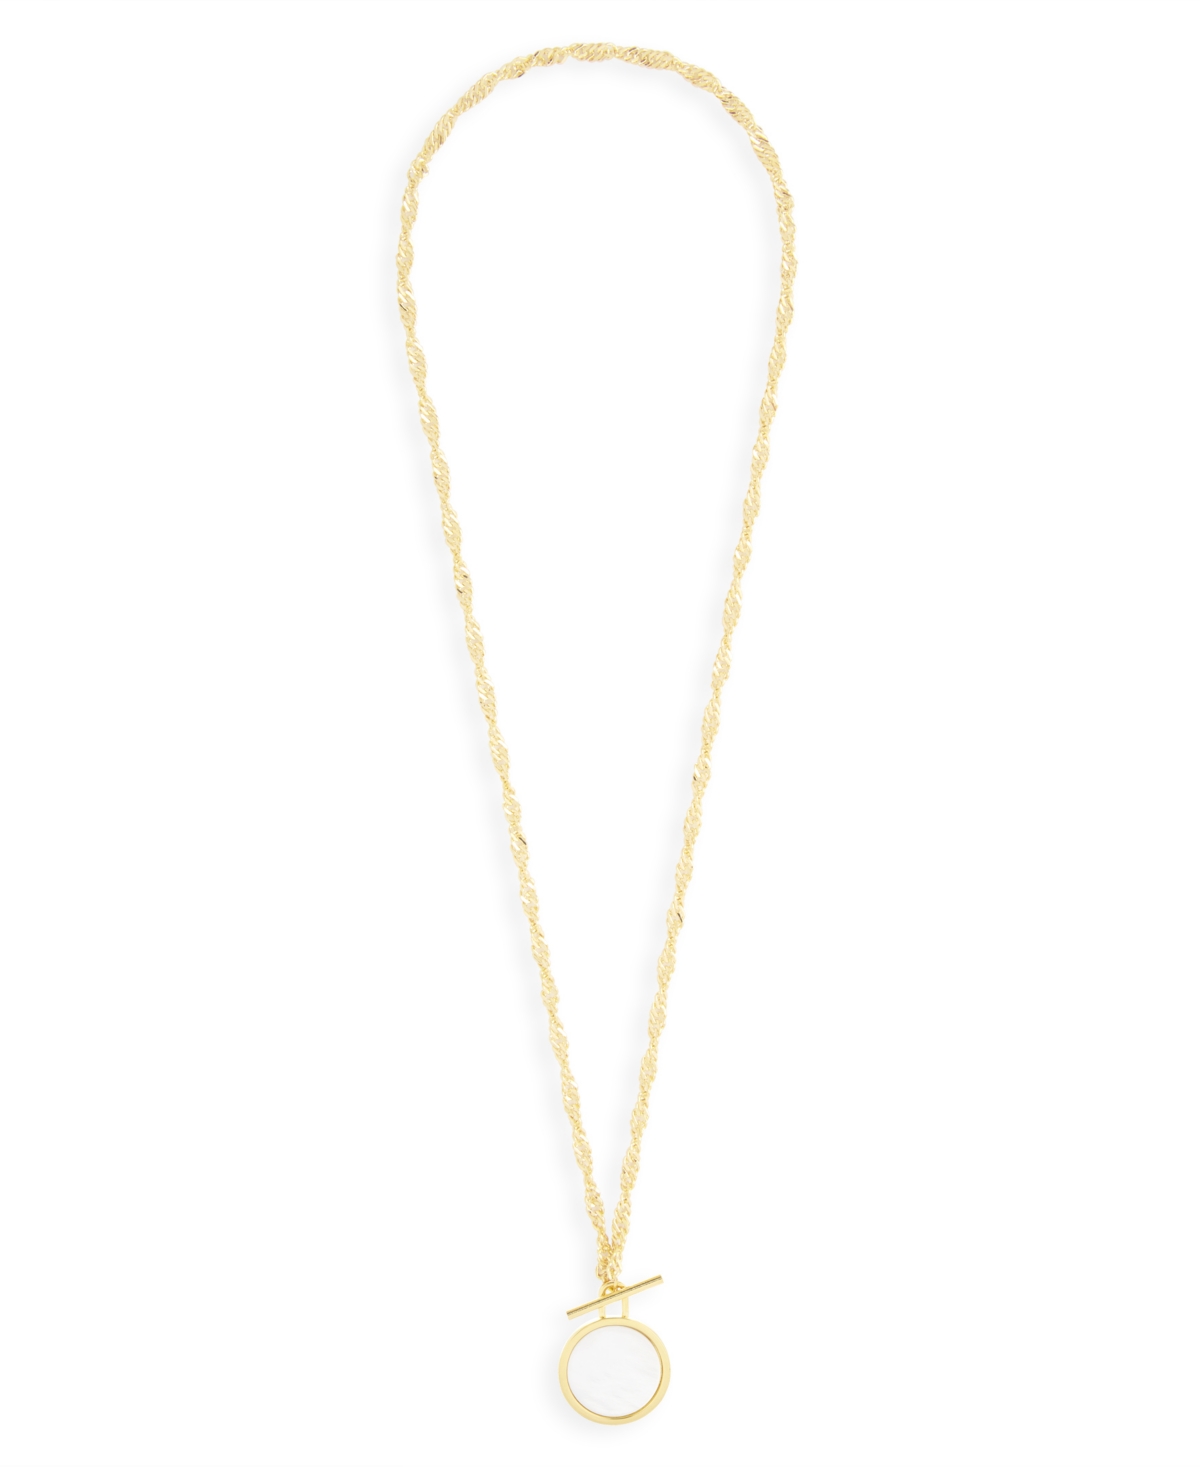 Layla 14K Gold Plated Toggle Necklace - Gold-Plated